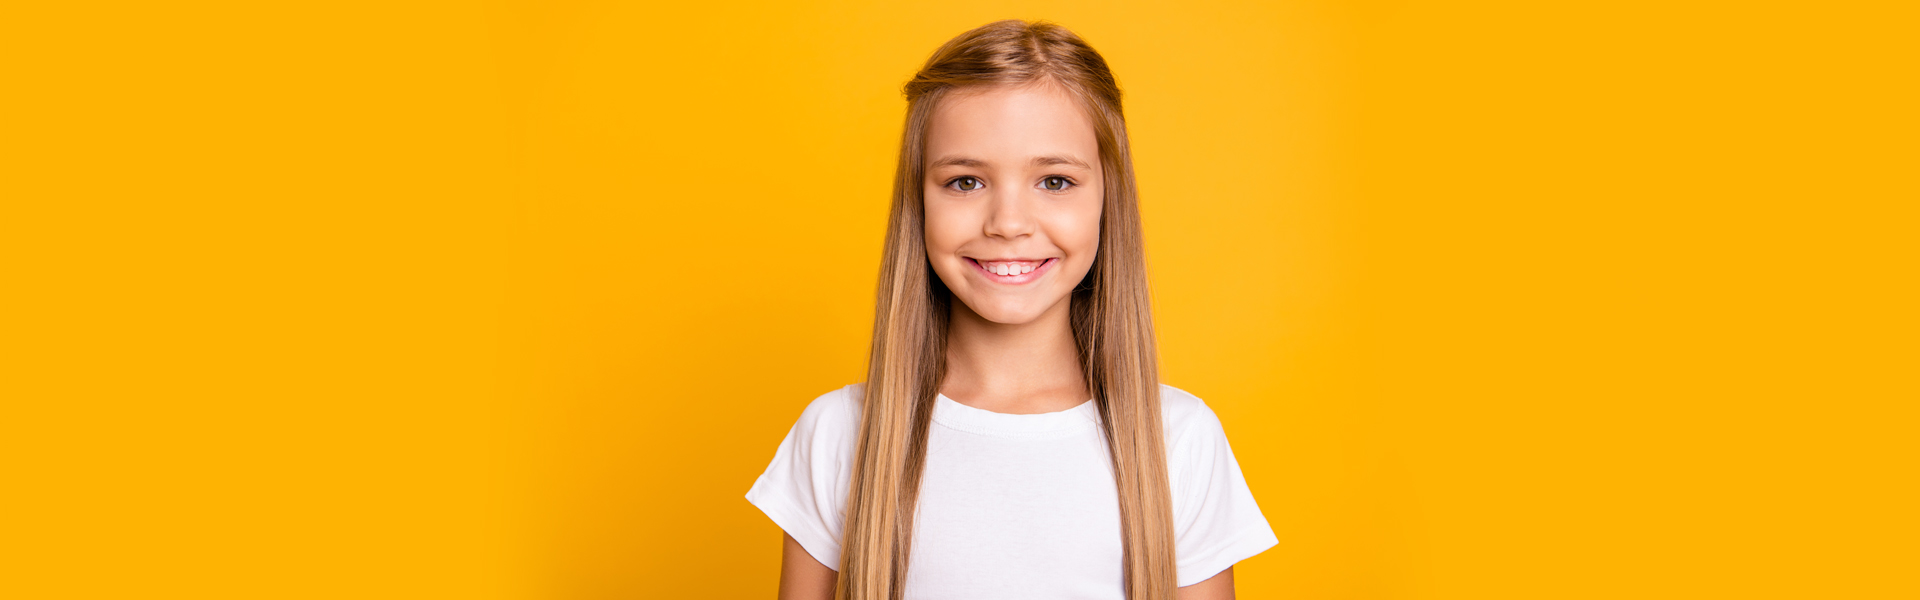 Want To Improve Your Child’s Smile? Our Pediatric Orthodontist Can Help You Achieve Your Goal